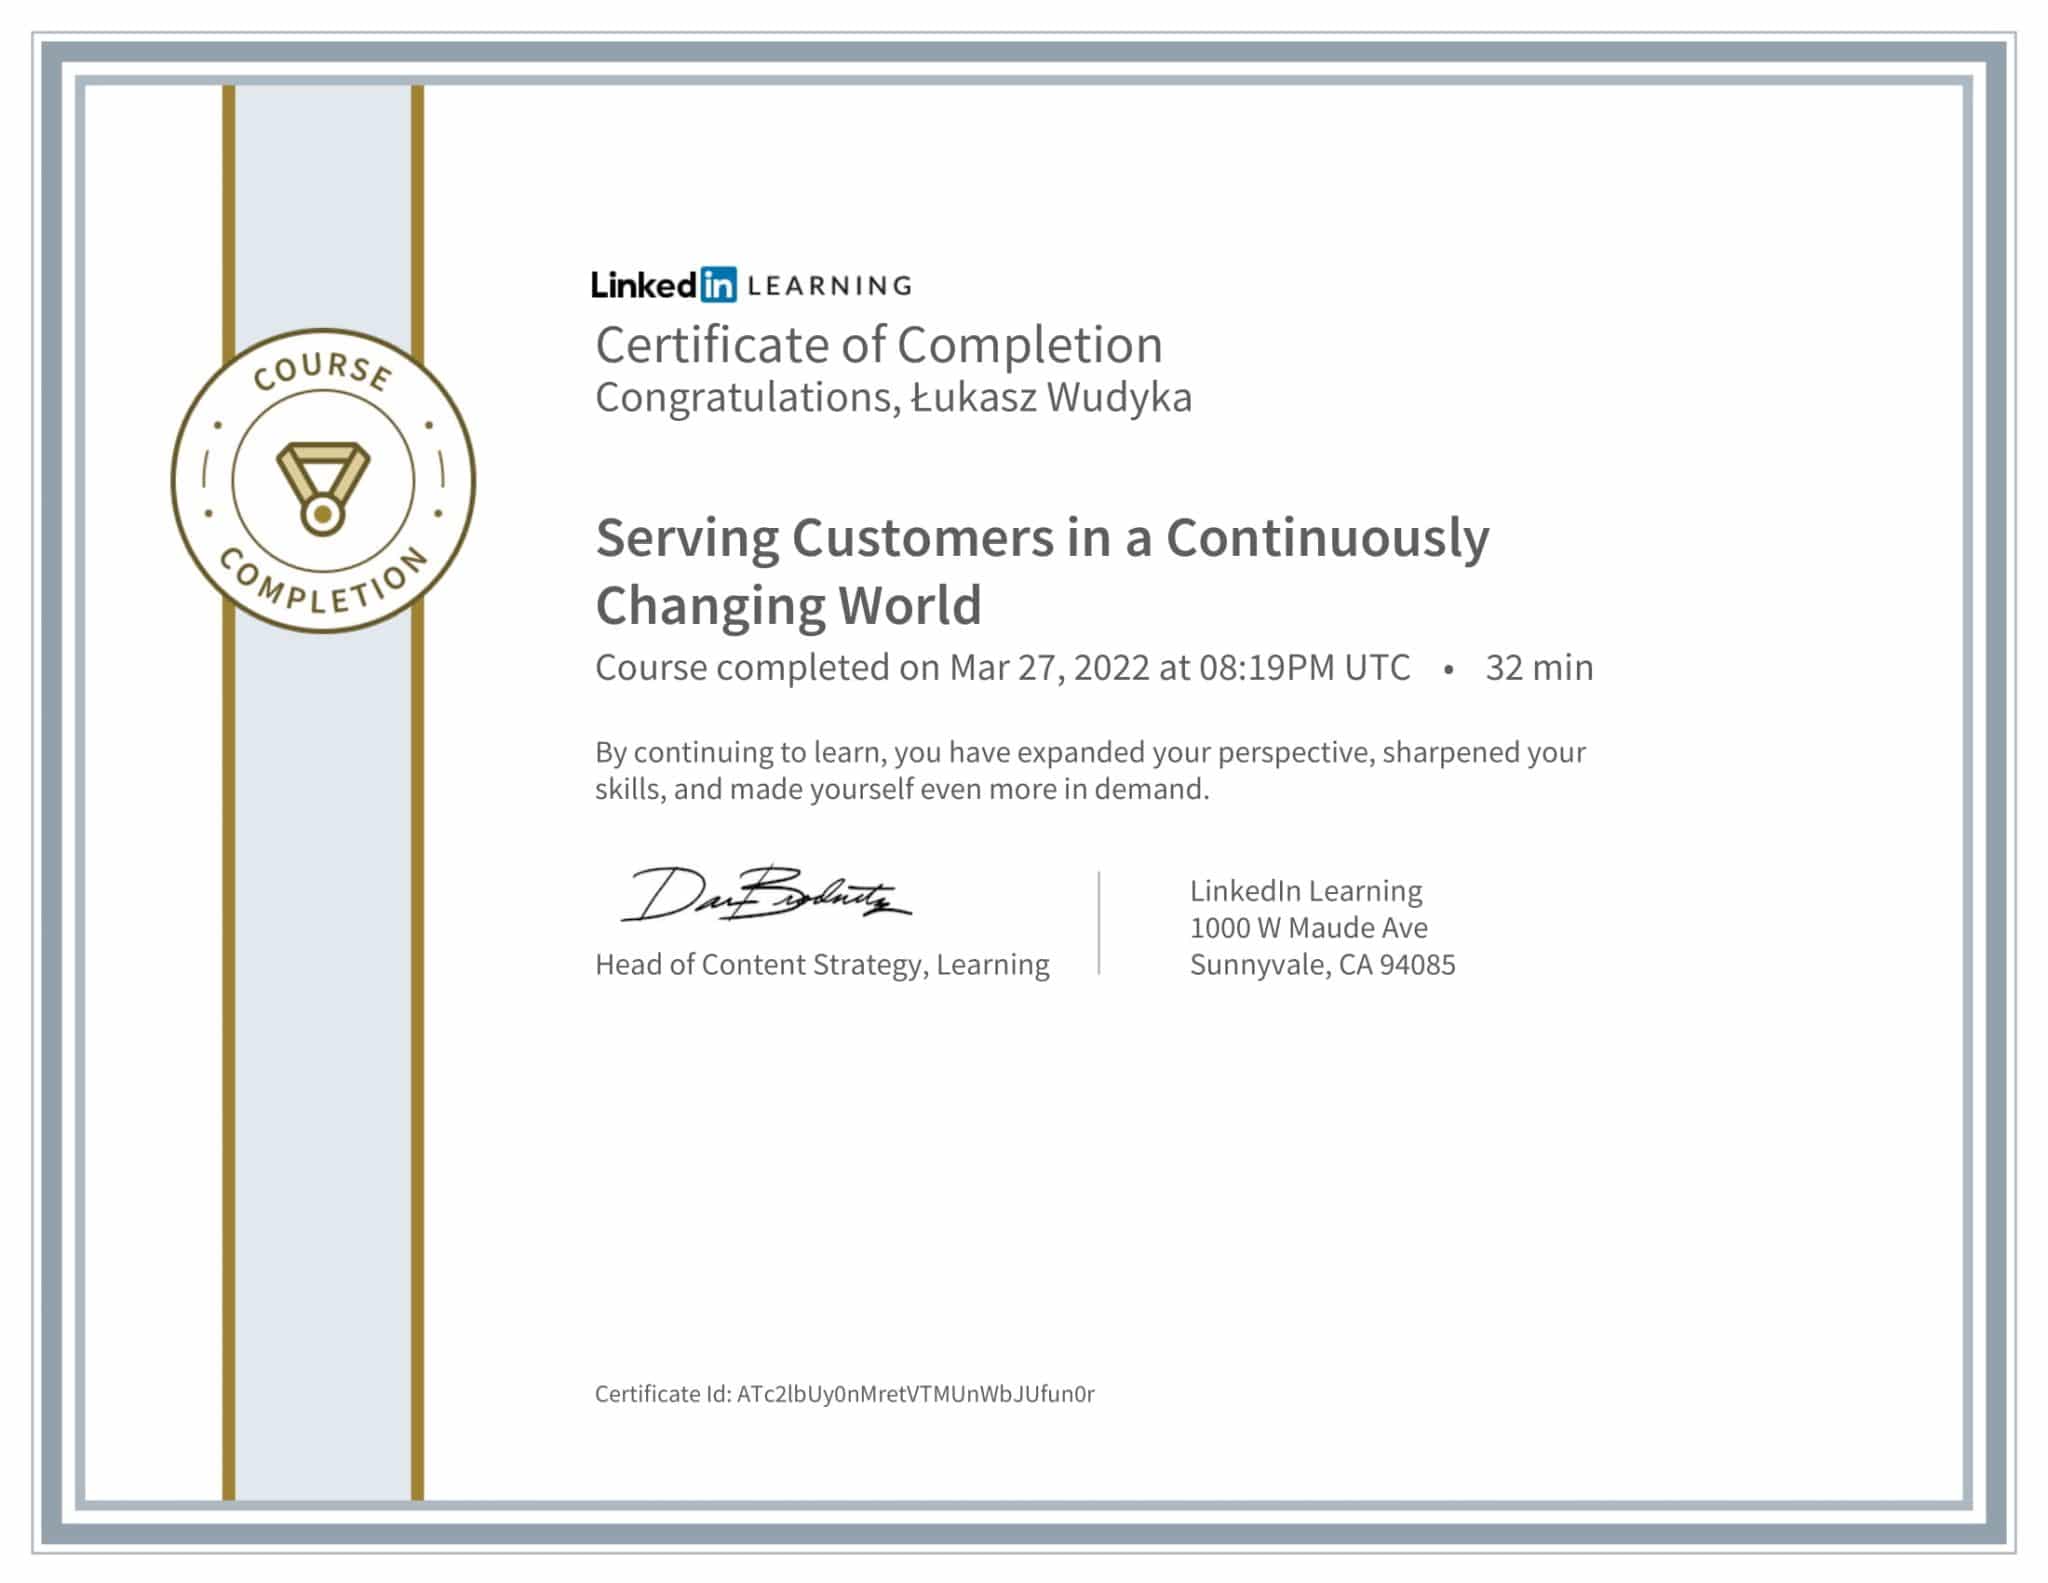 CertificateOfCompletion_Serving Customers in a Continuously Changing World-1